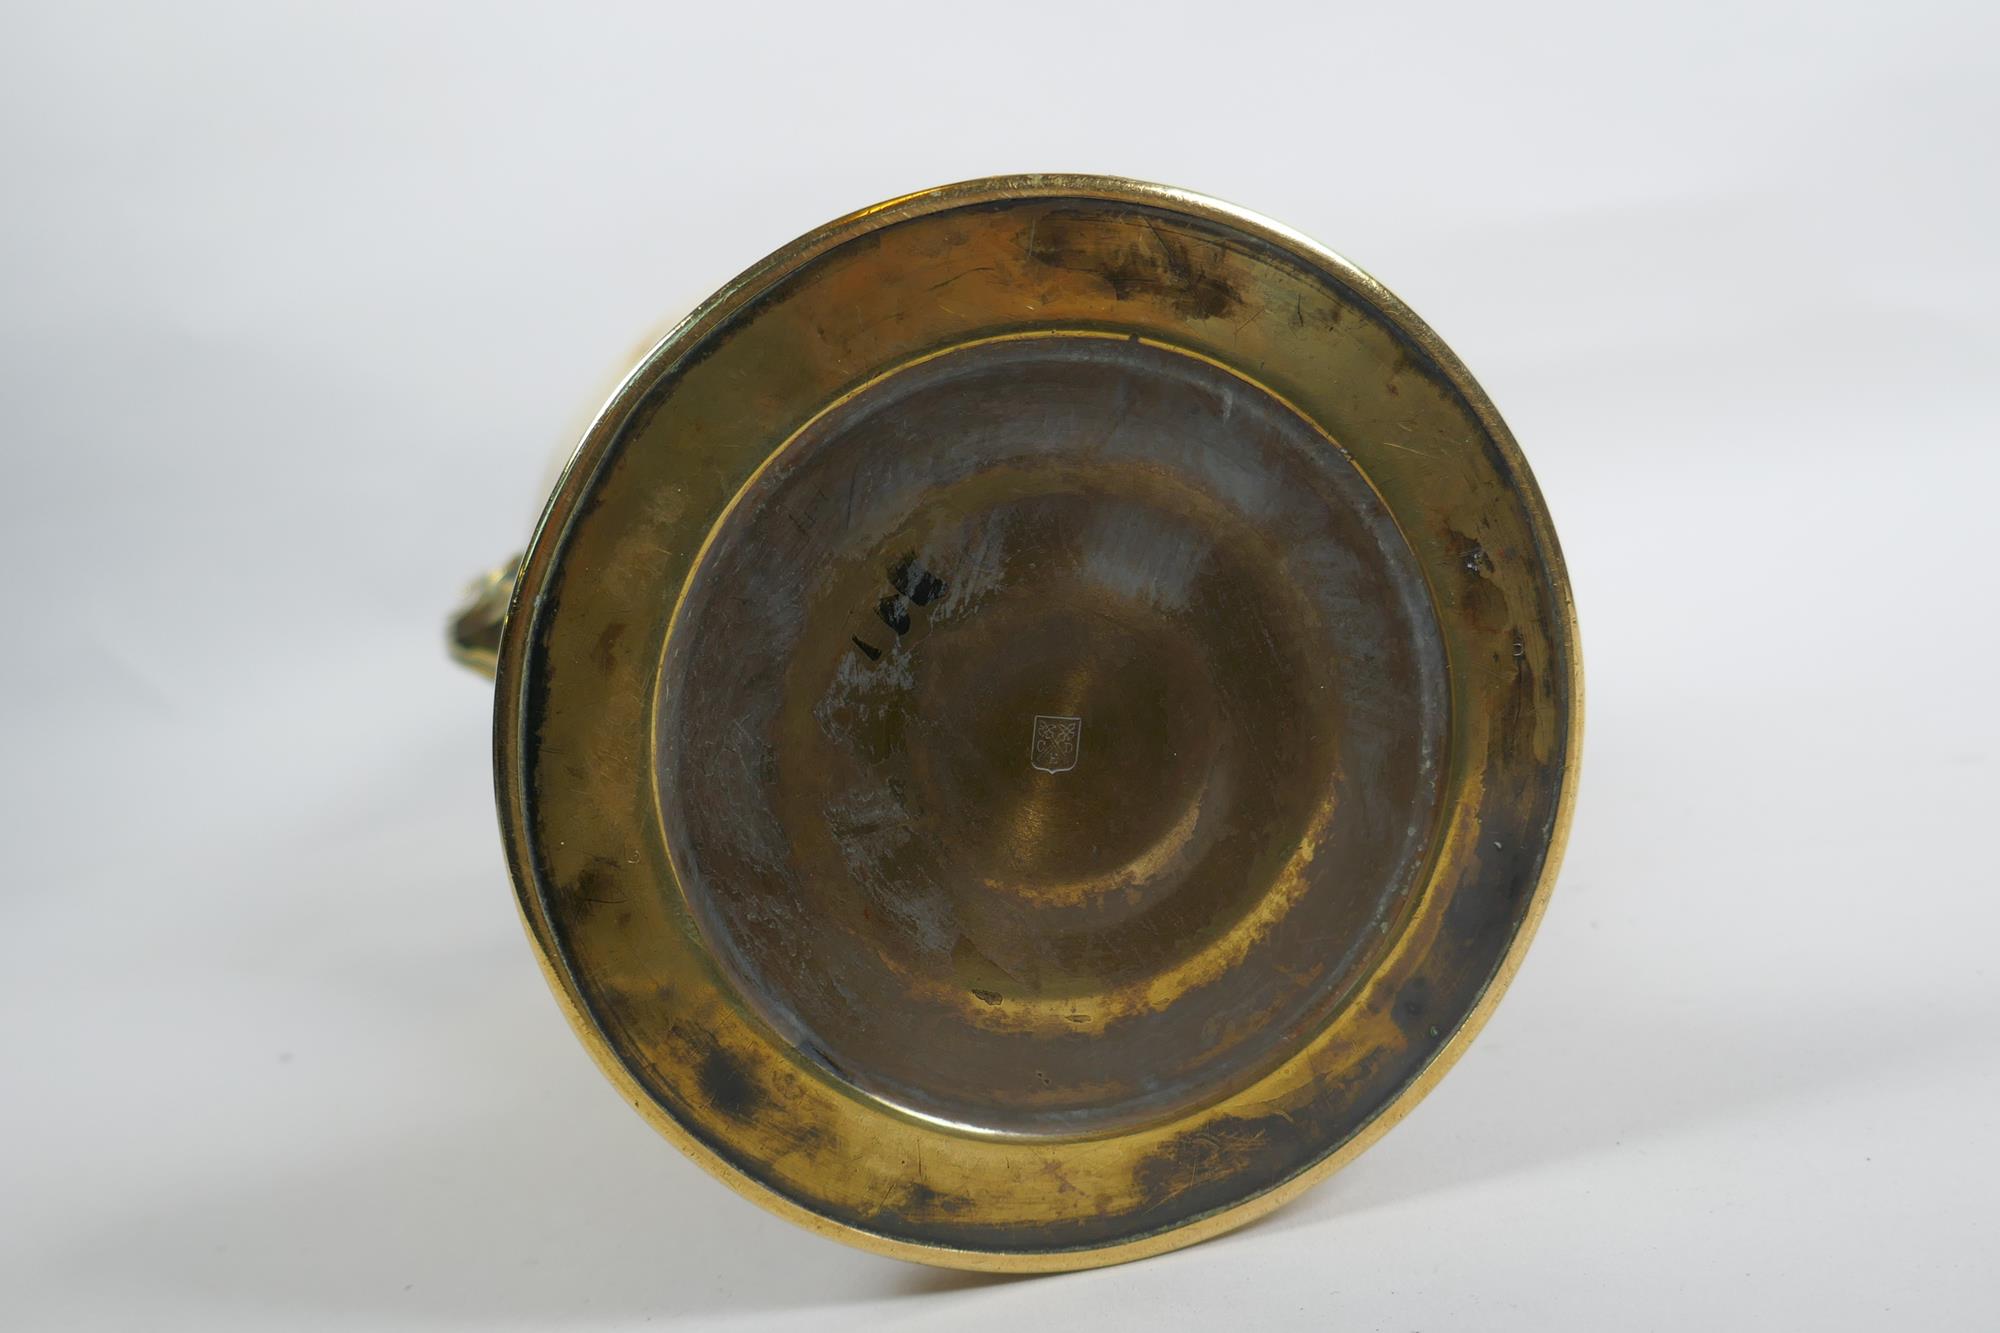 A late C19th/early C20th German brass two handled Grecian style urn by Carl Deffner of Esslingen, - Image 5 of 6